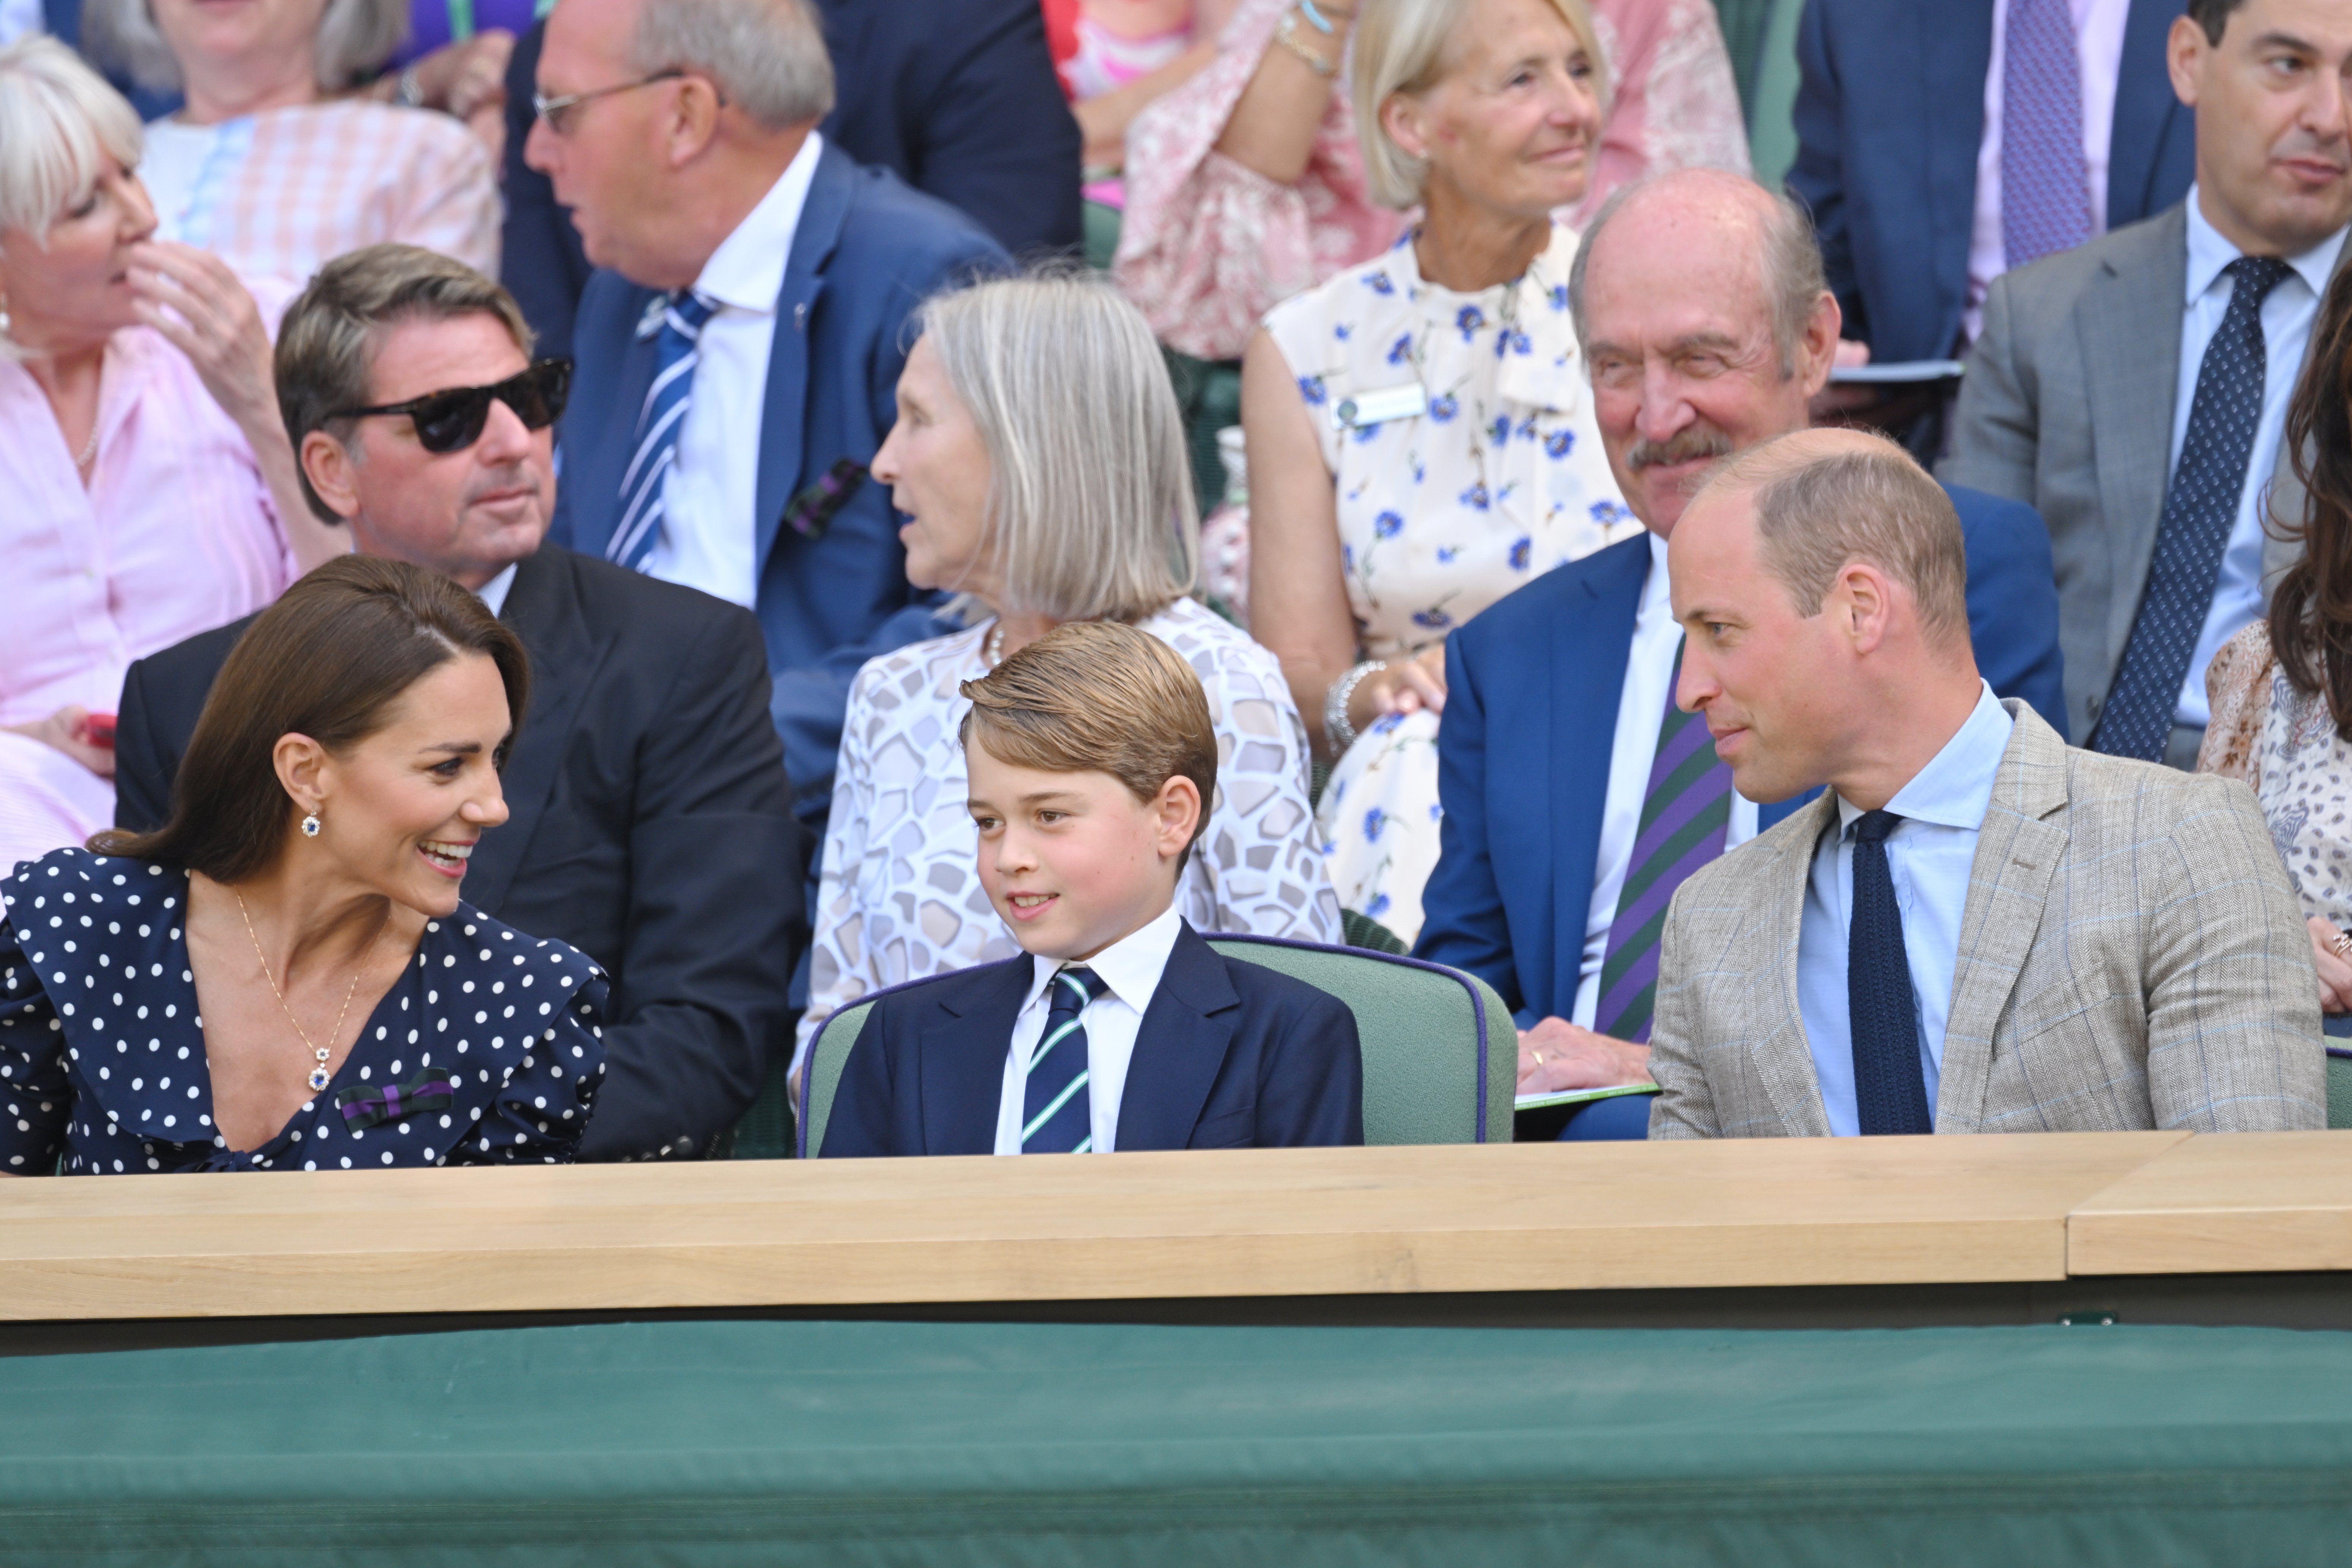 Kate Middleton pictured with her son Prince George and husband Prince William during The Wimbledon Men's Singles Final at the All England Lawn Tennis and Croquet Club on July 10, 2022 in London, England. | Source: Getty Images